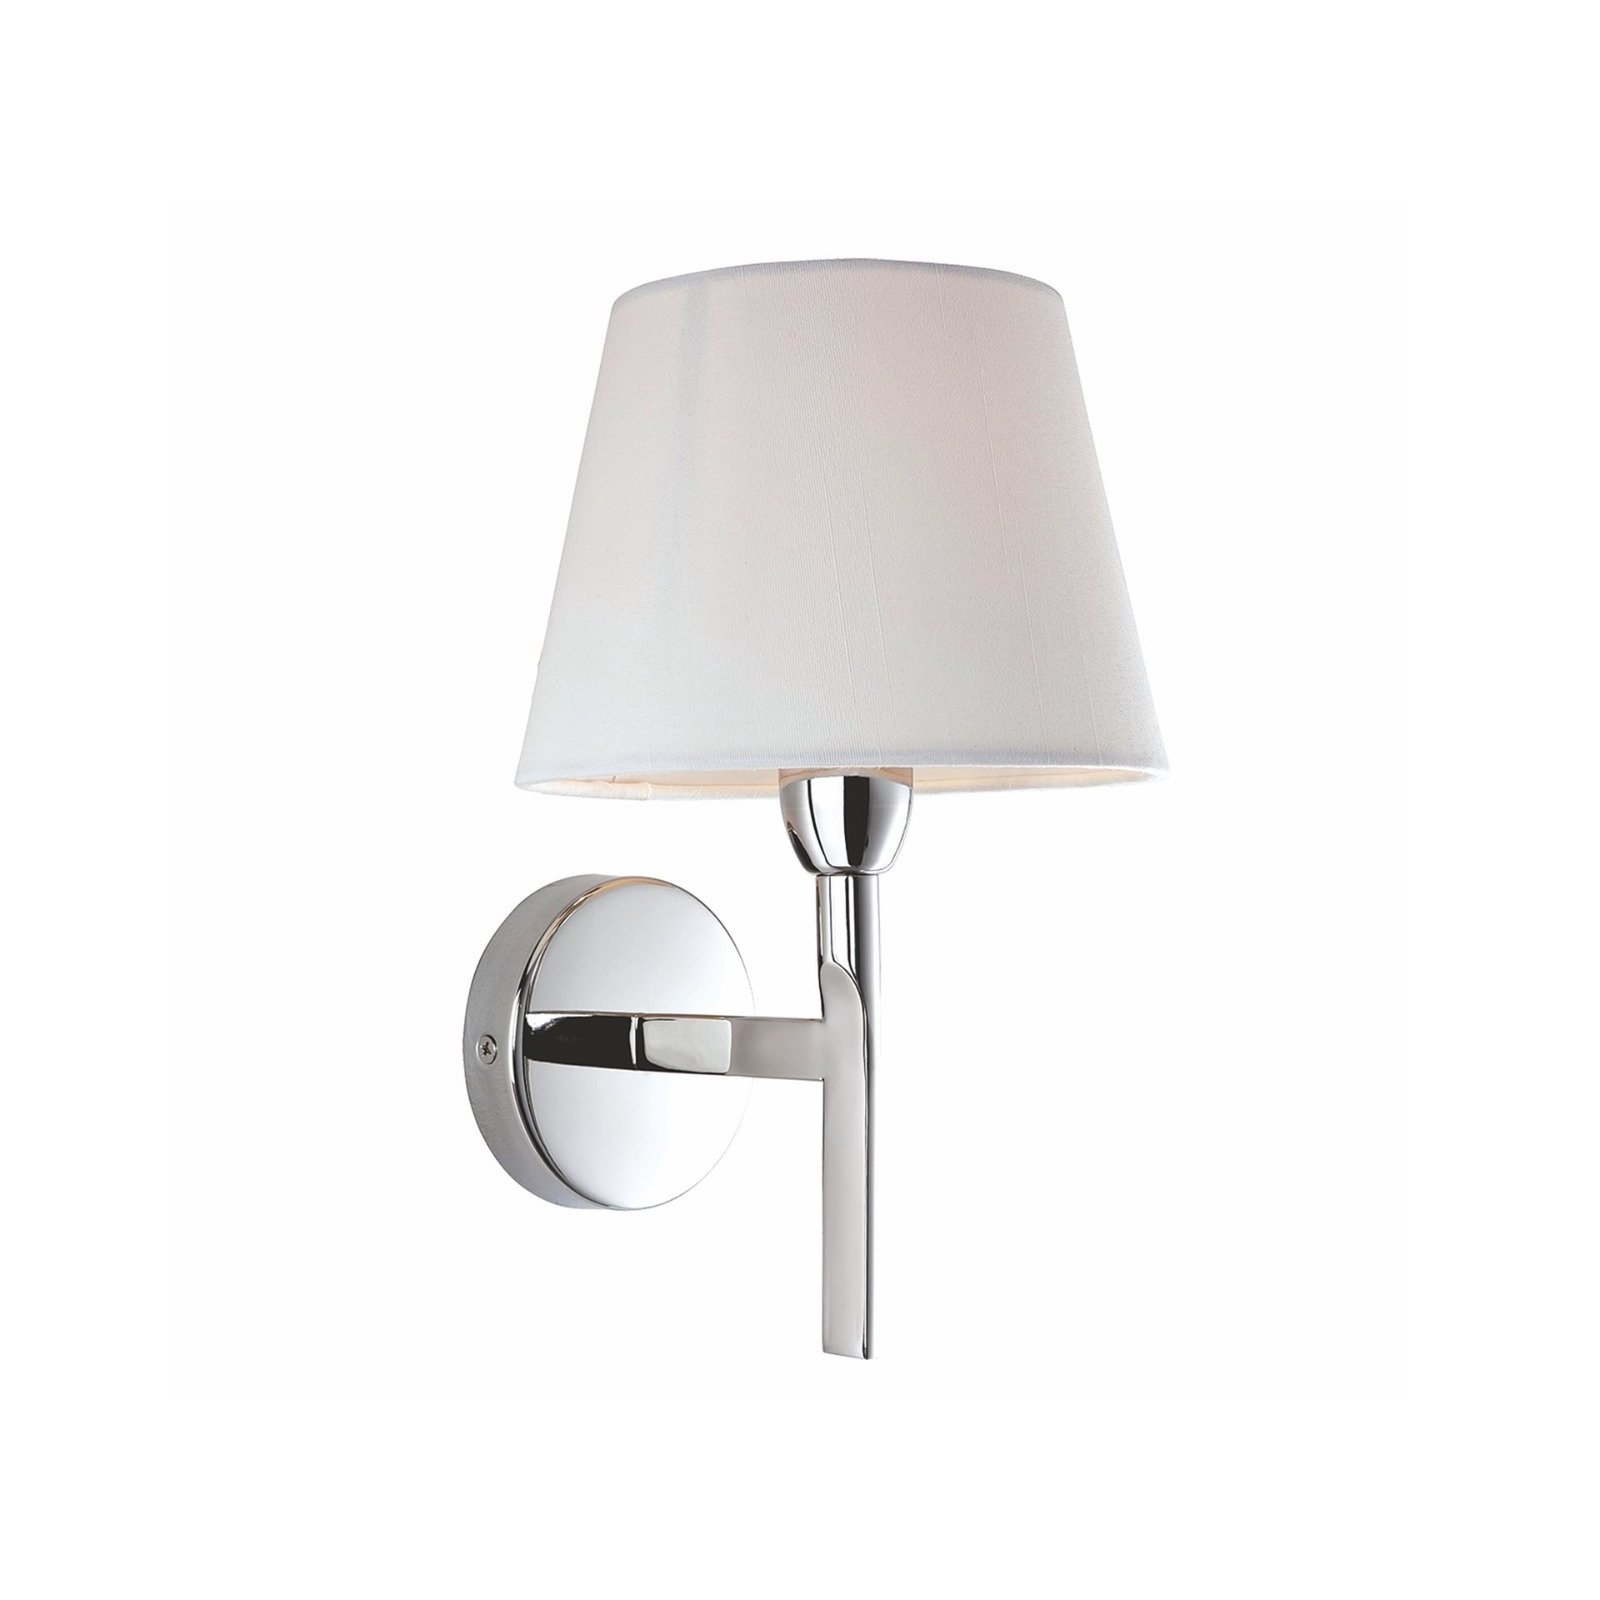 Firstlight 8217PST Transition 1 Light Wall Lamp In Stainless Steel With Cream Shade